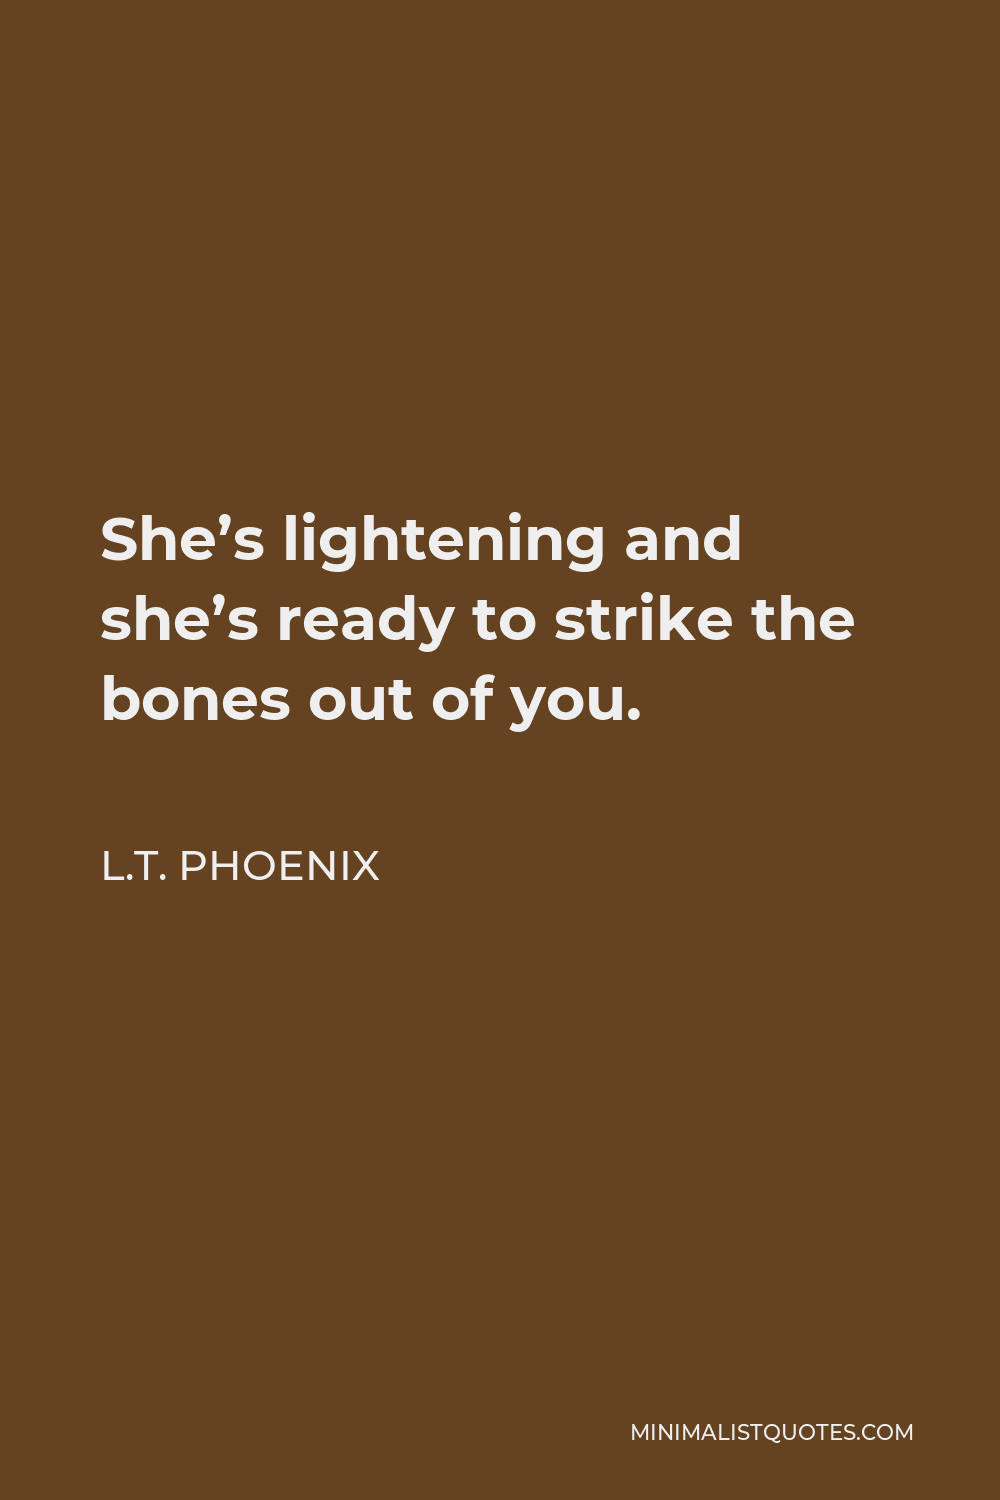 L.T. Phoenix Quote - She’s lightening and she’s ready to strike the bones out of you.